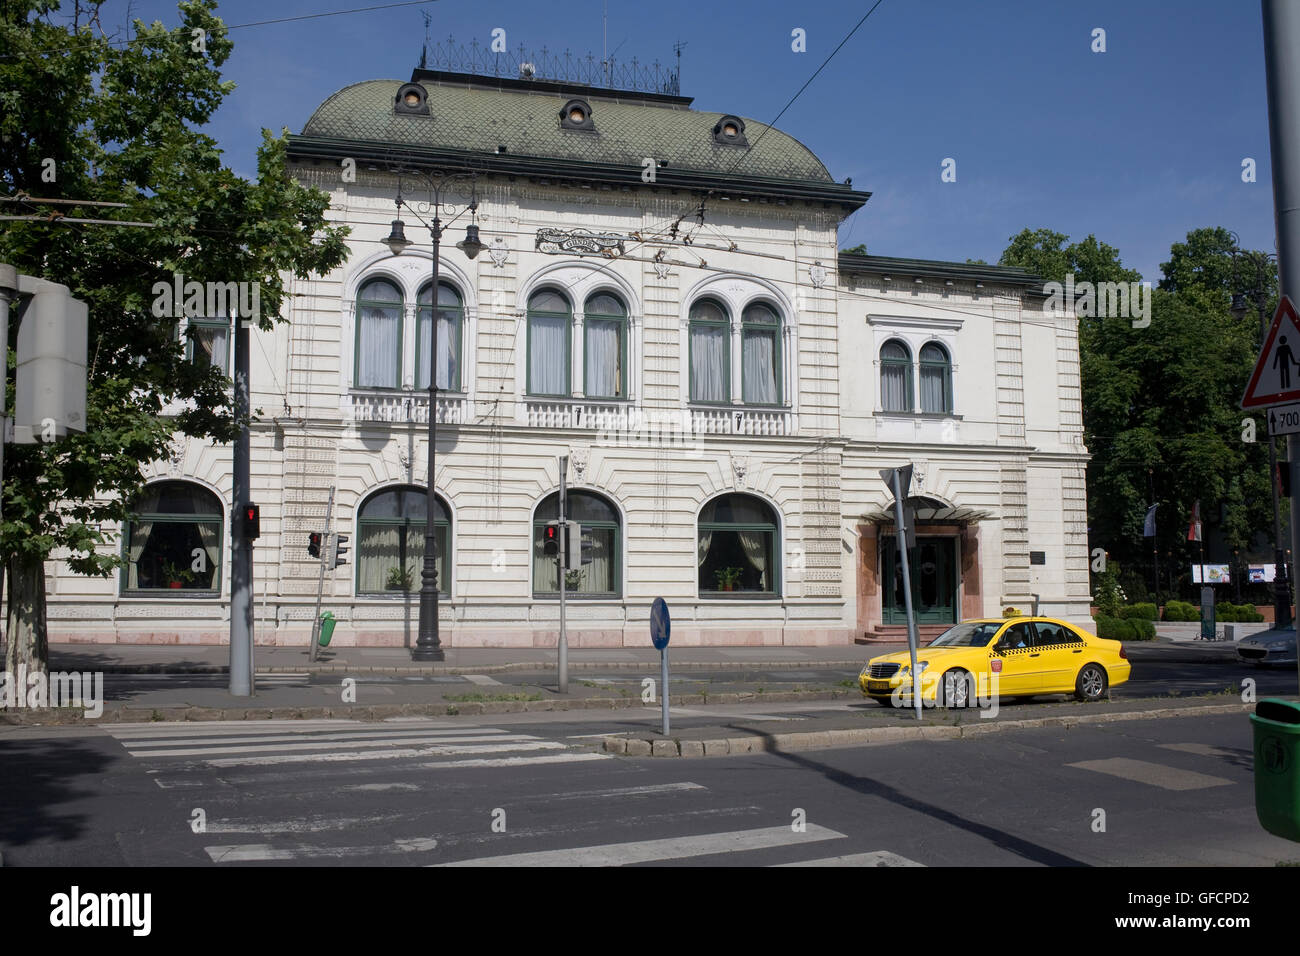 Gundel restaurant on Károly út in City park with pedestrian crossing and taxi outside Stock Photo